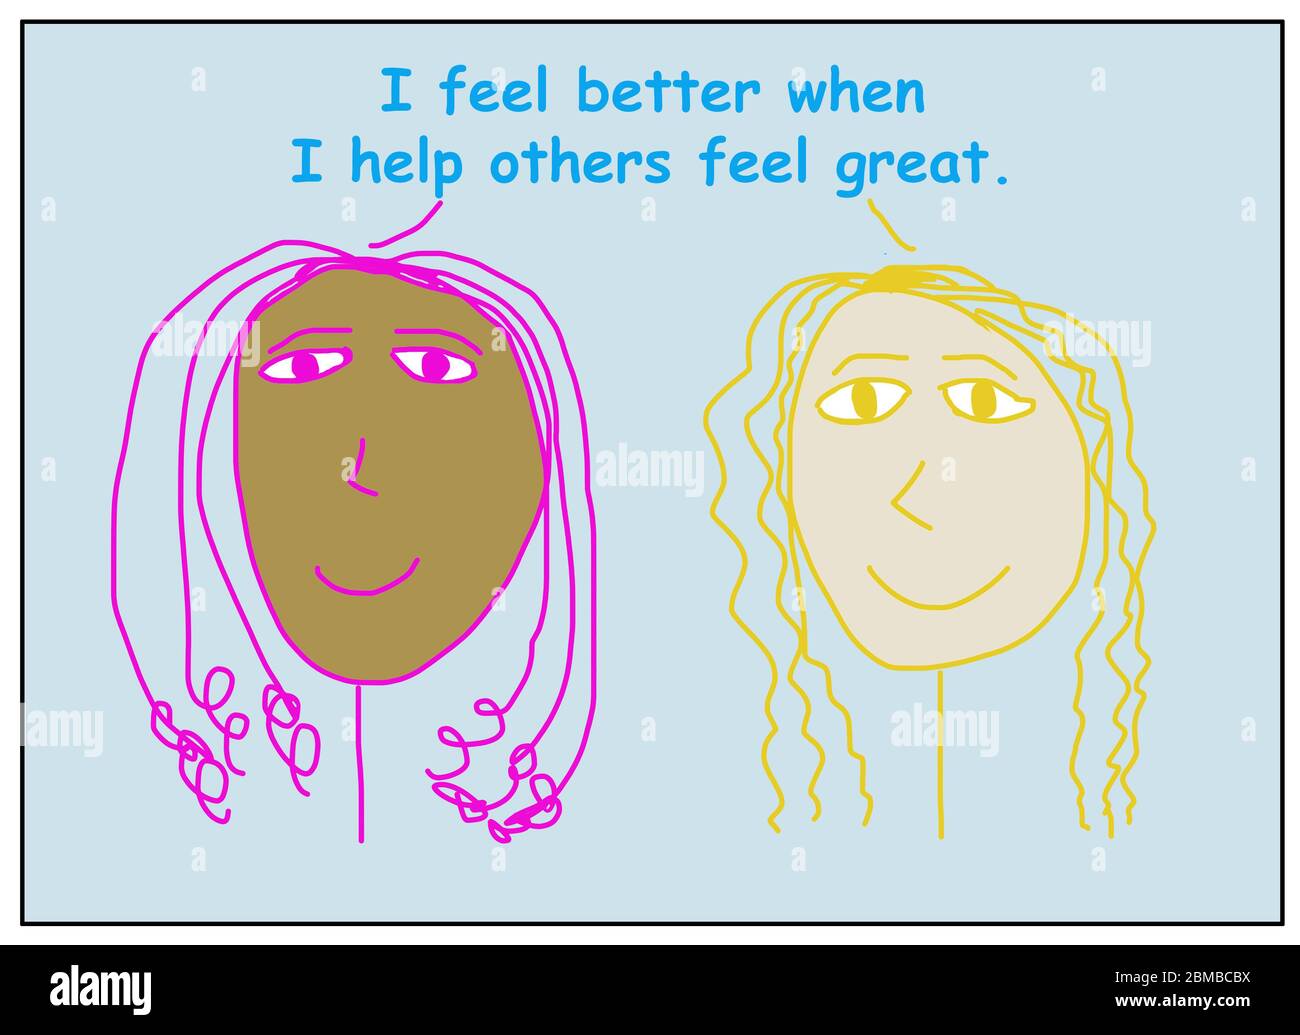 Color cartoon of two smiling and ethnically diverse women stating they they feel better when they help others feel great. Stock Photo